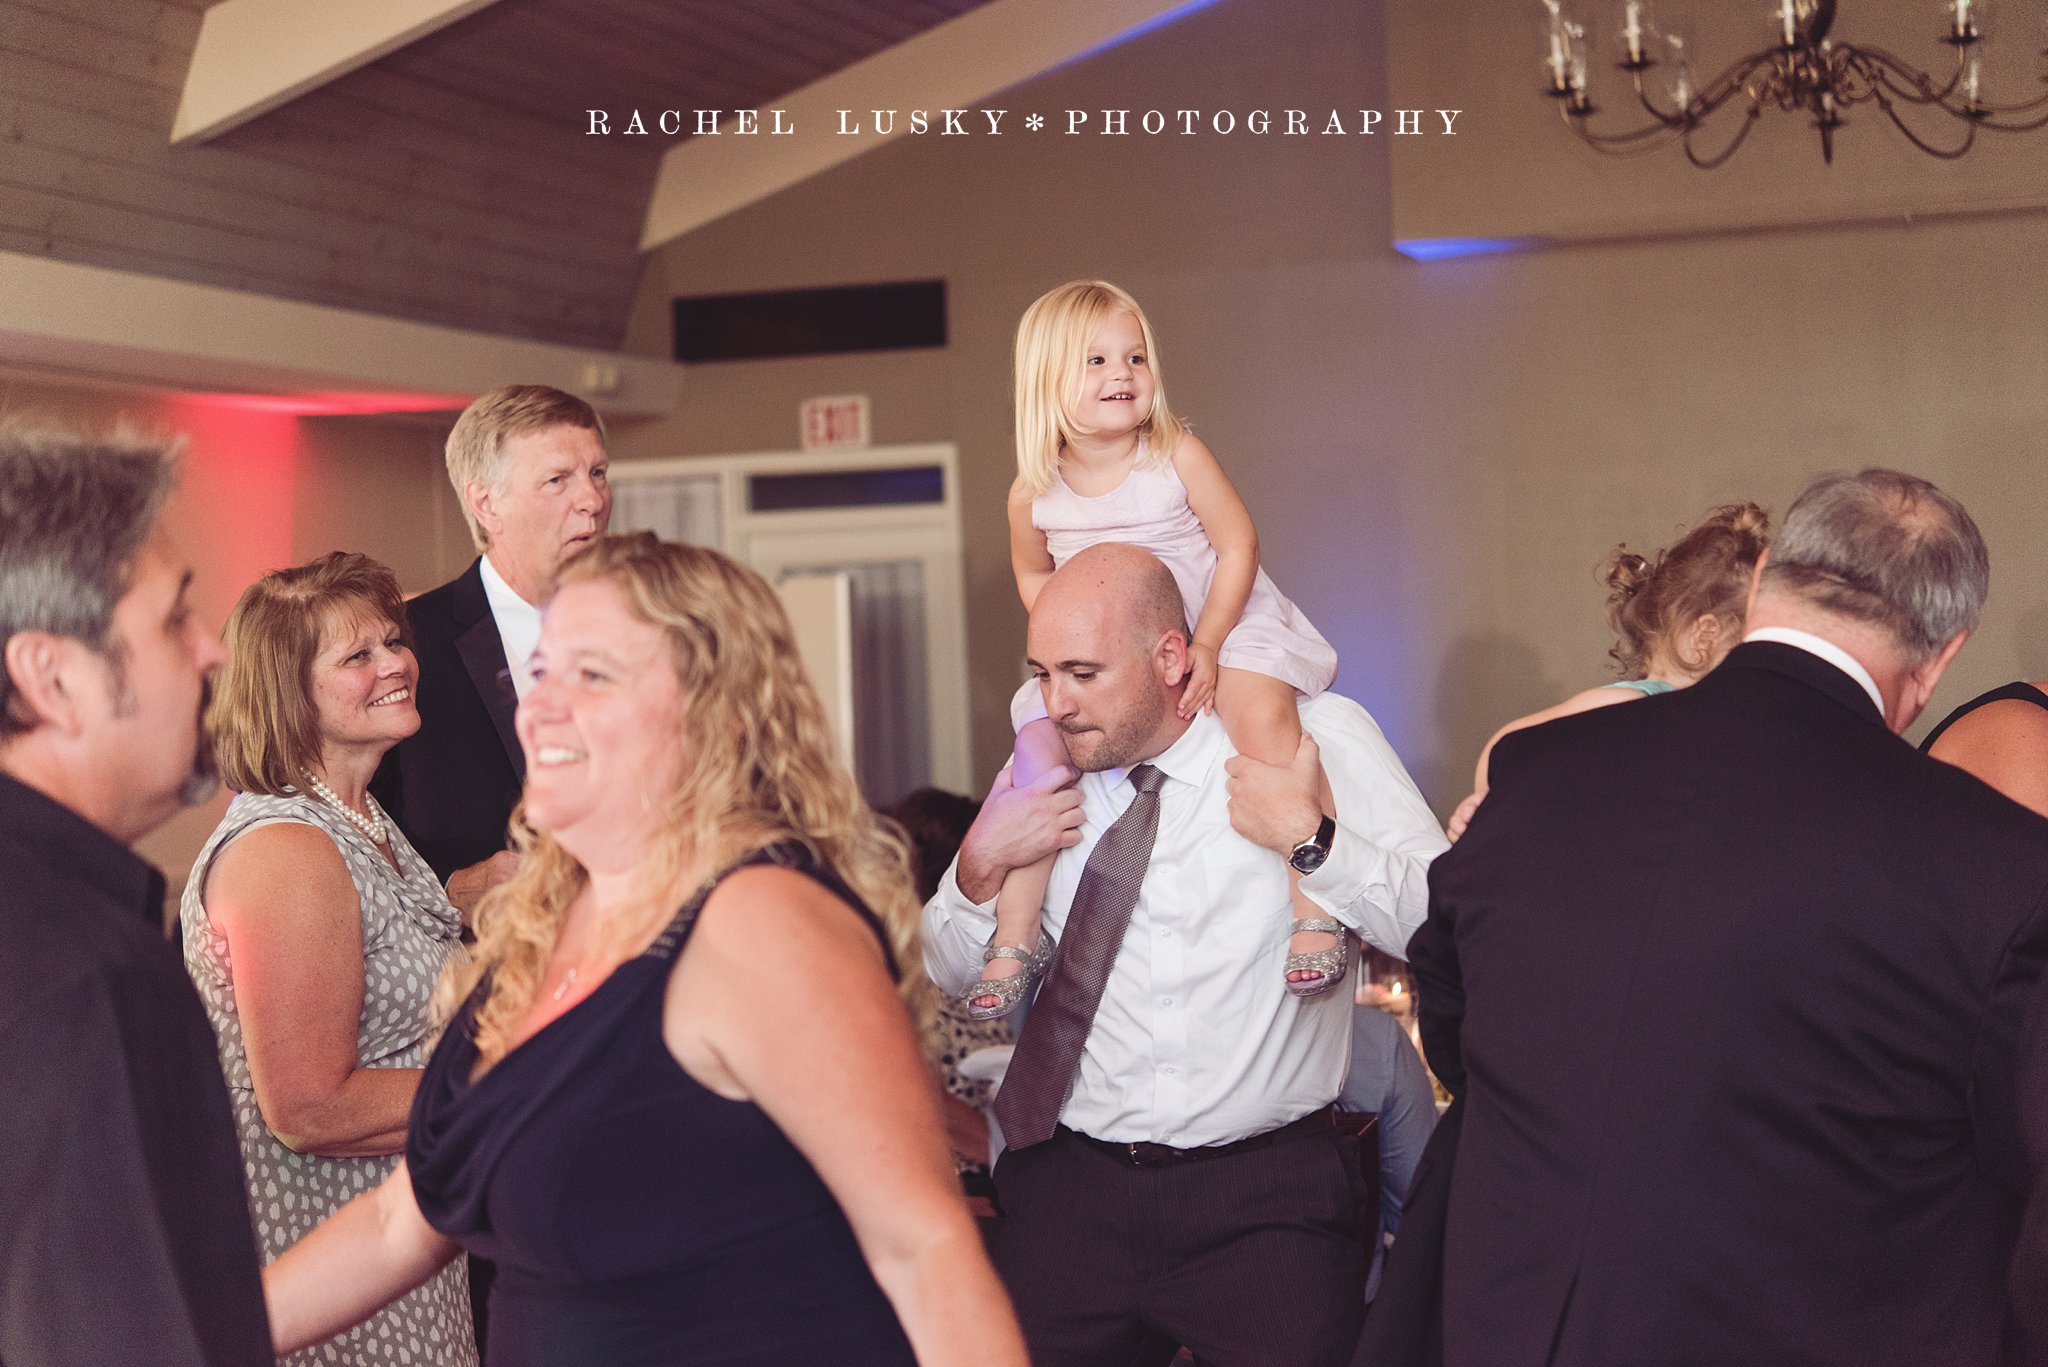 Lakeview Country Club Wedding Photography, Erie PA Wedding Photographer, Blush Wedding